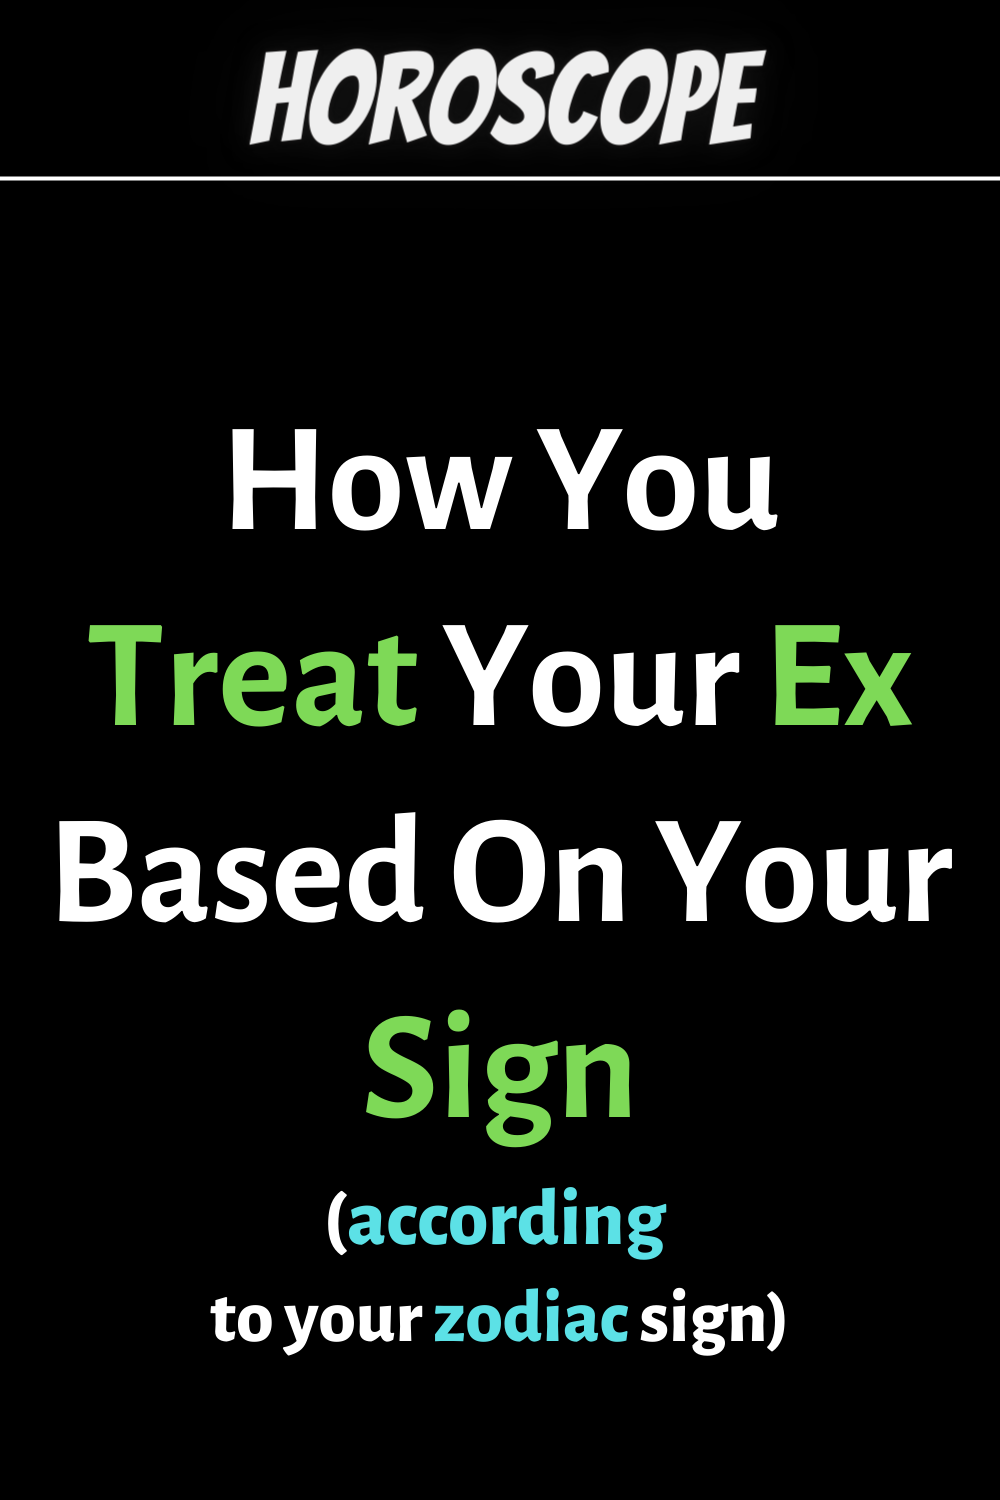 How You Treat Your Ex Based On Your Zodiac Sign